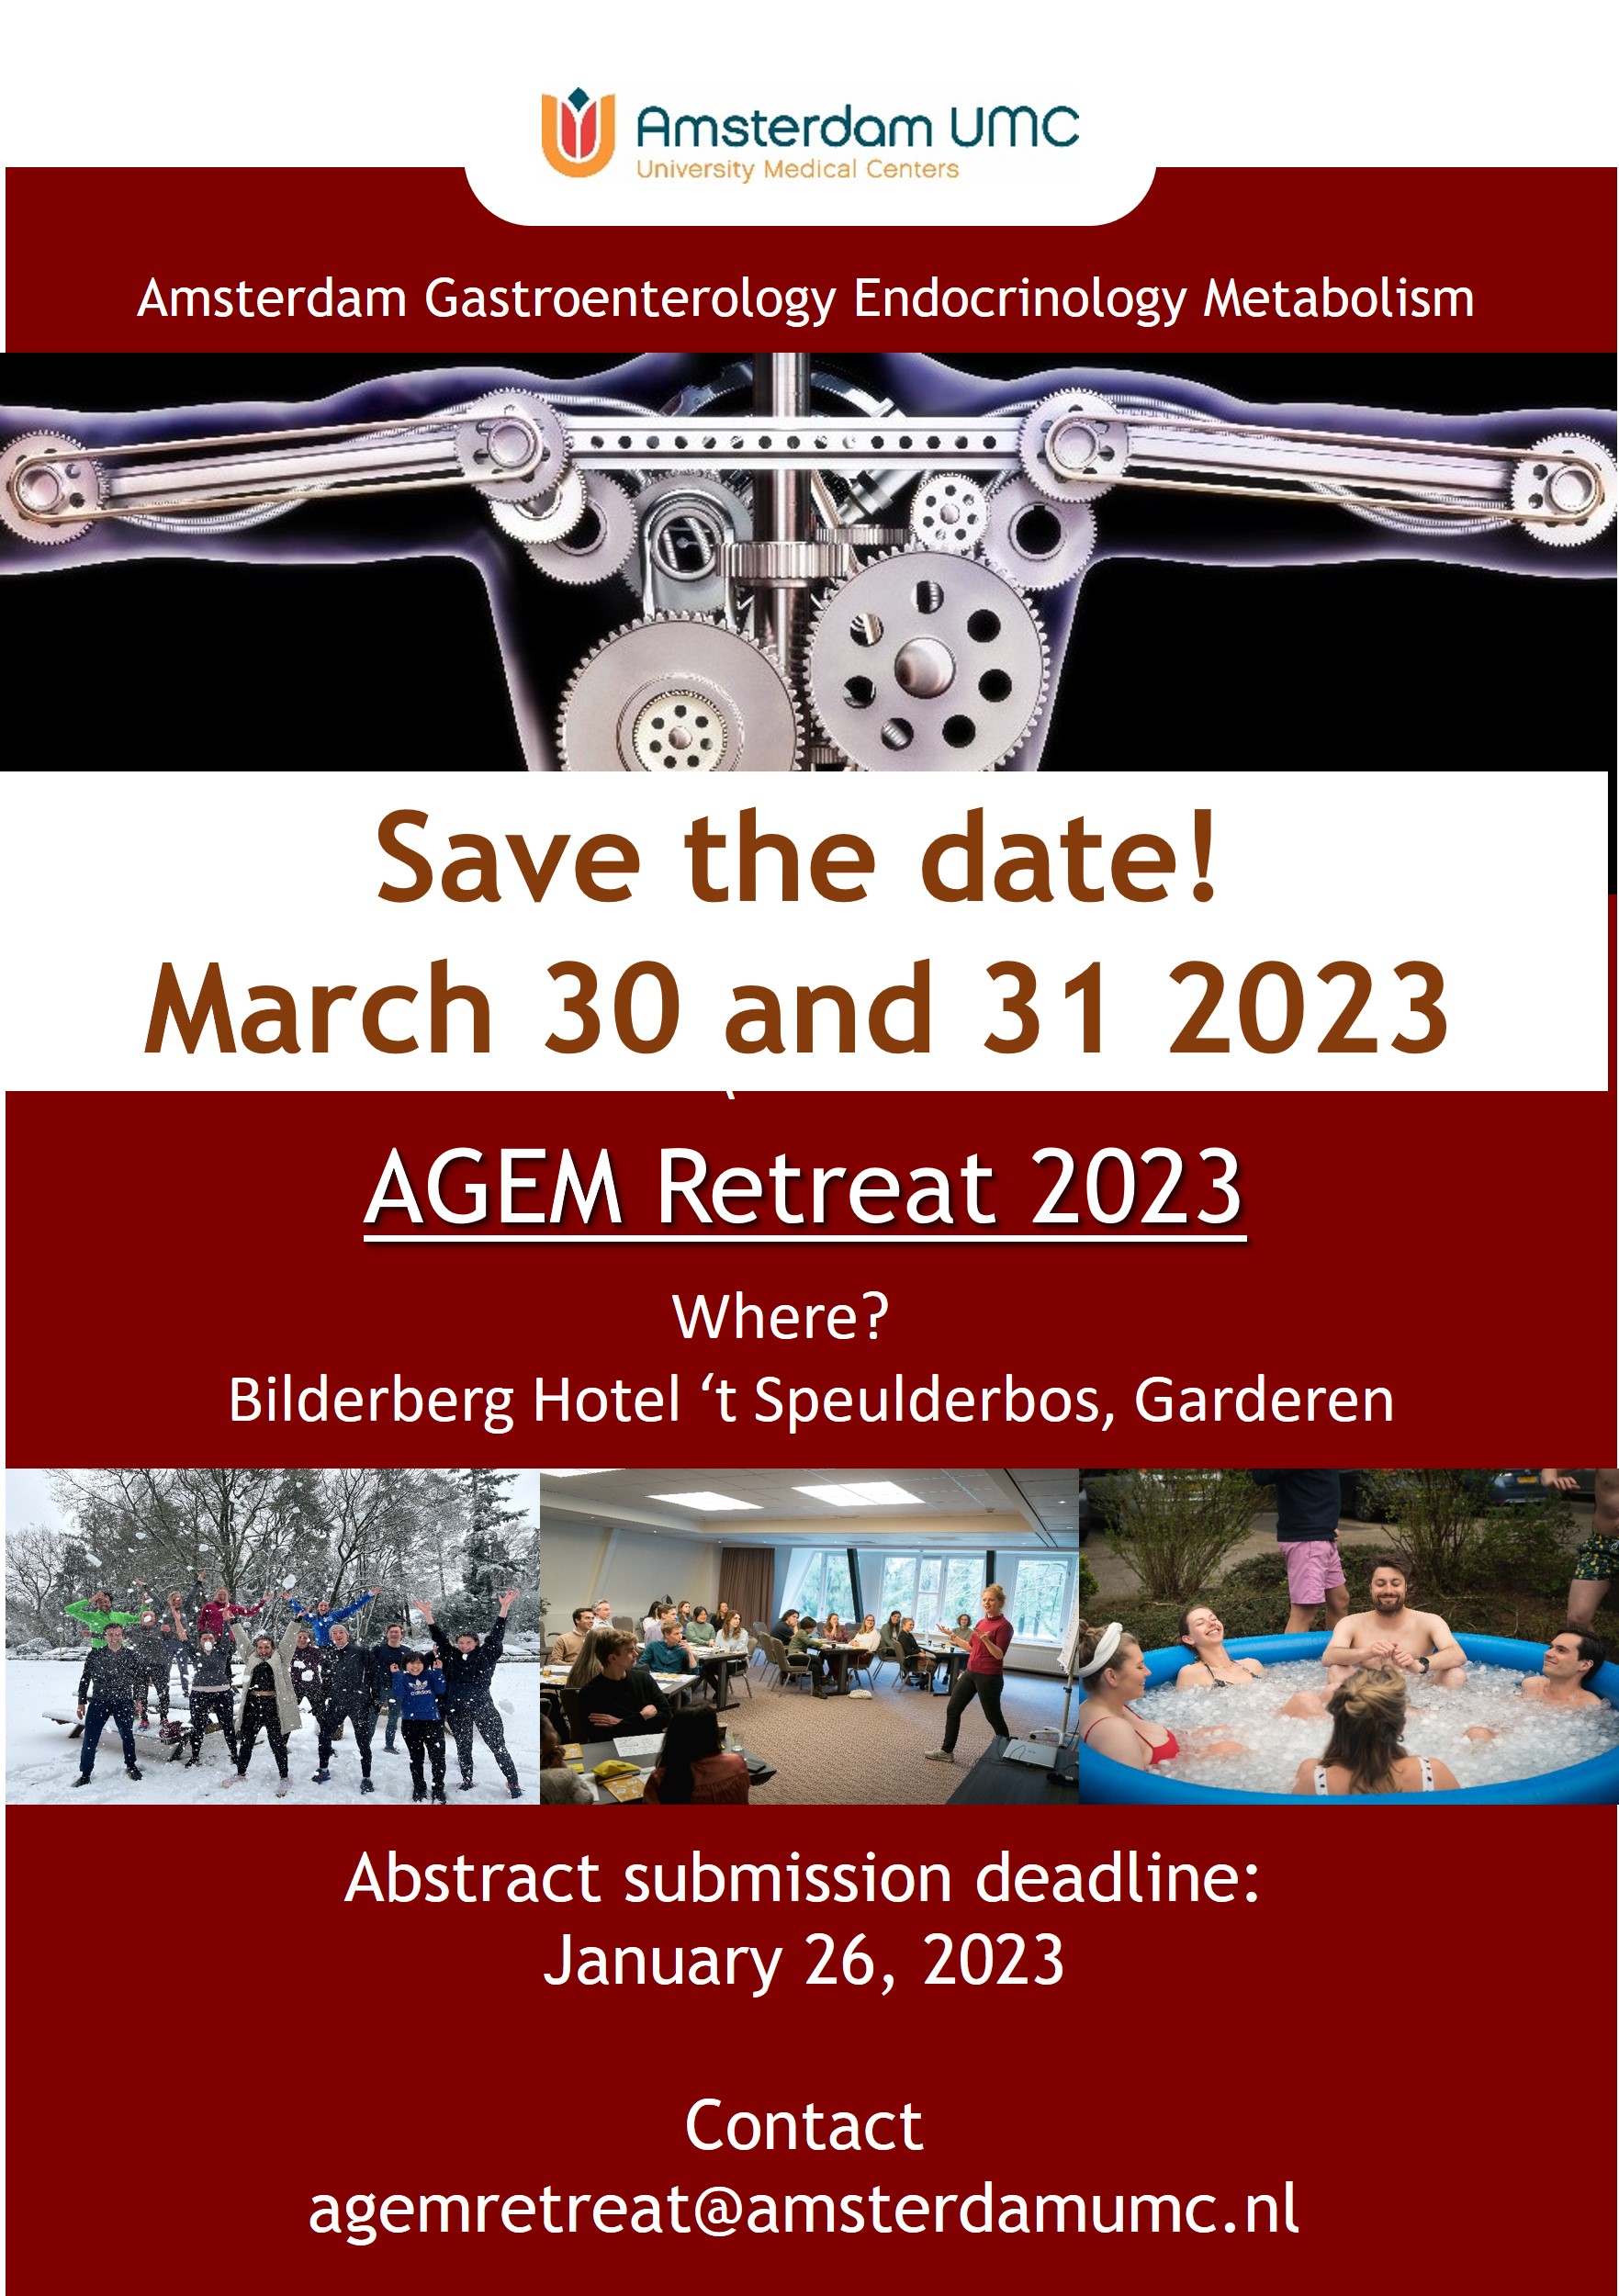 Save the date poster AGEM retreat 2023